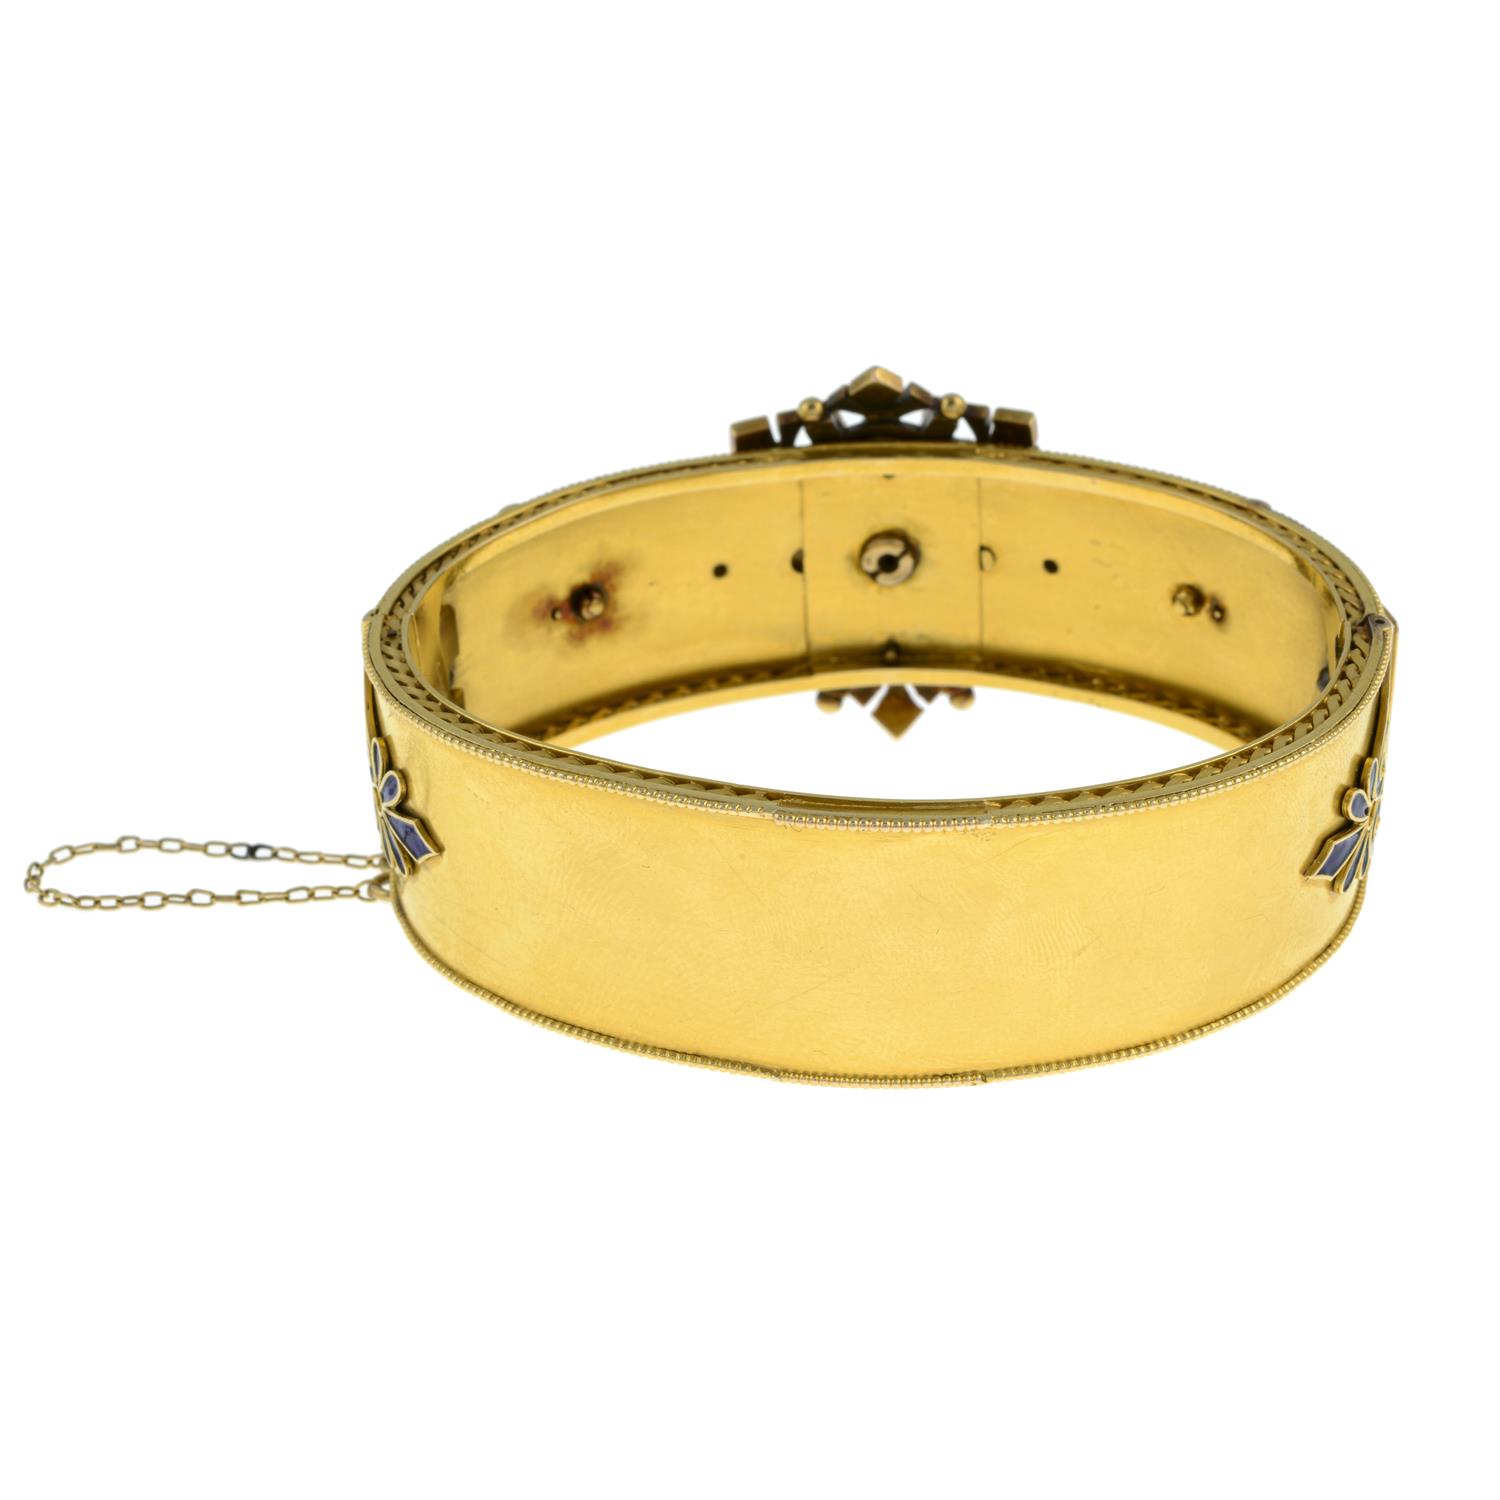 Gold gem and enamel bangle, by Carlo Giuliano - Image 3 of 5